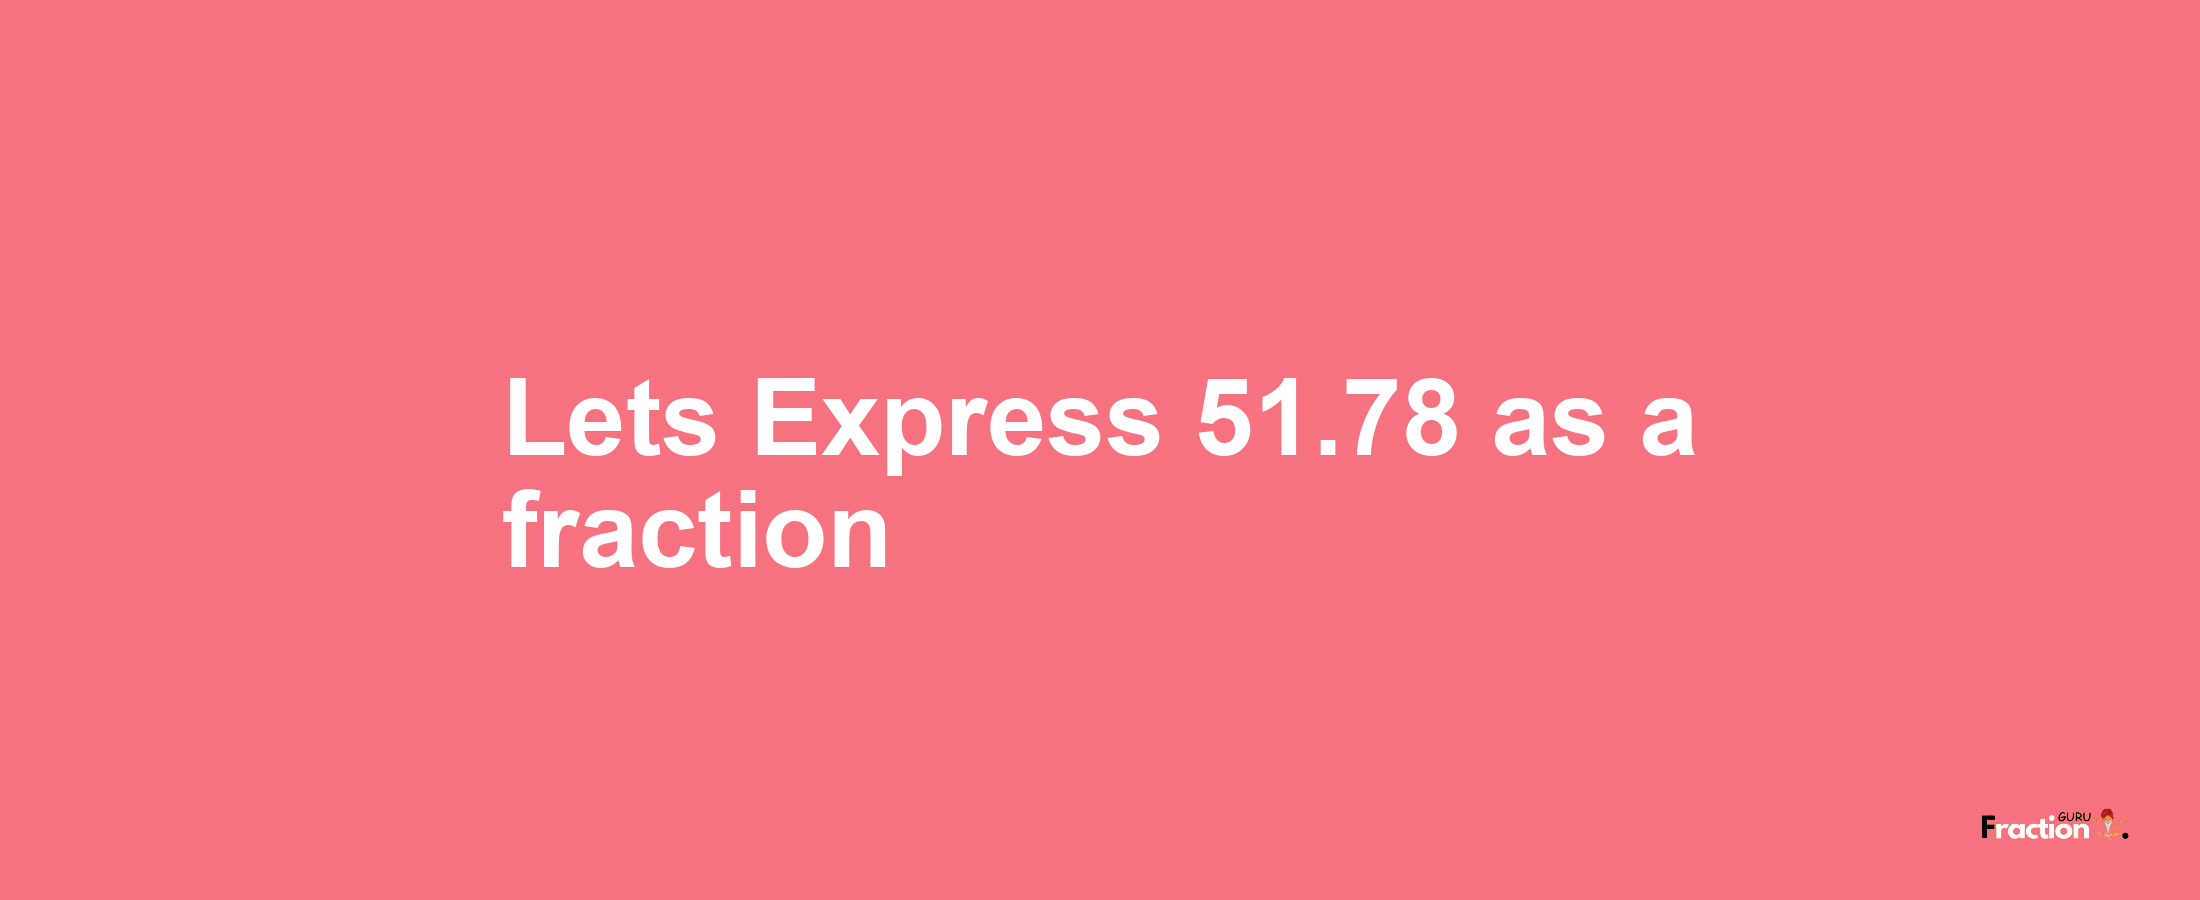 Lets Express 51.78 as afraction